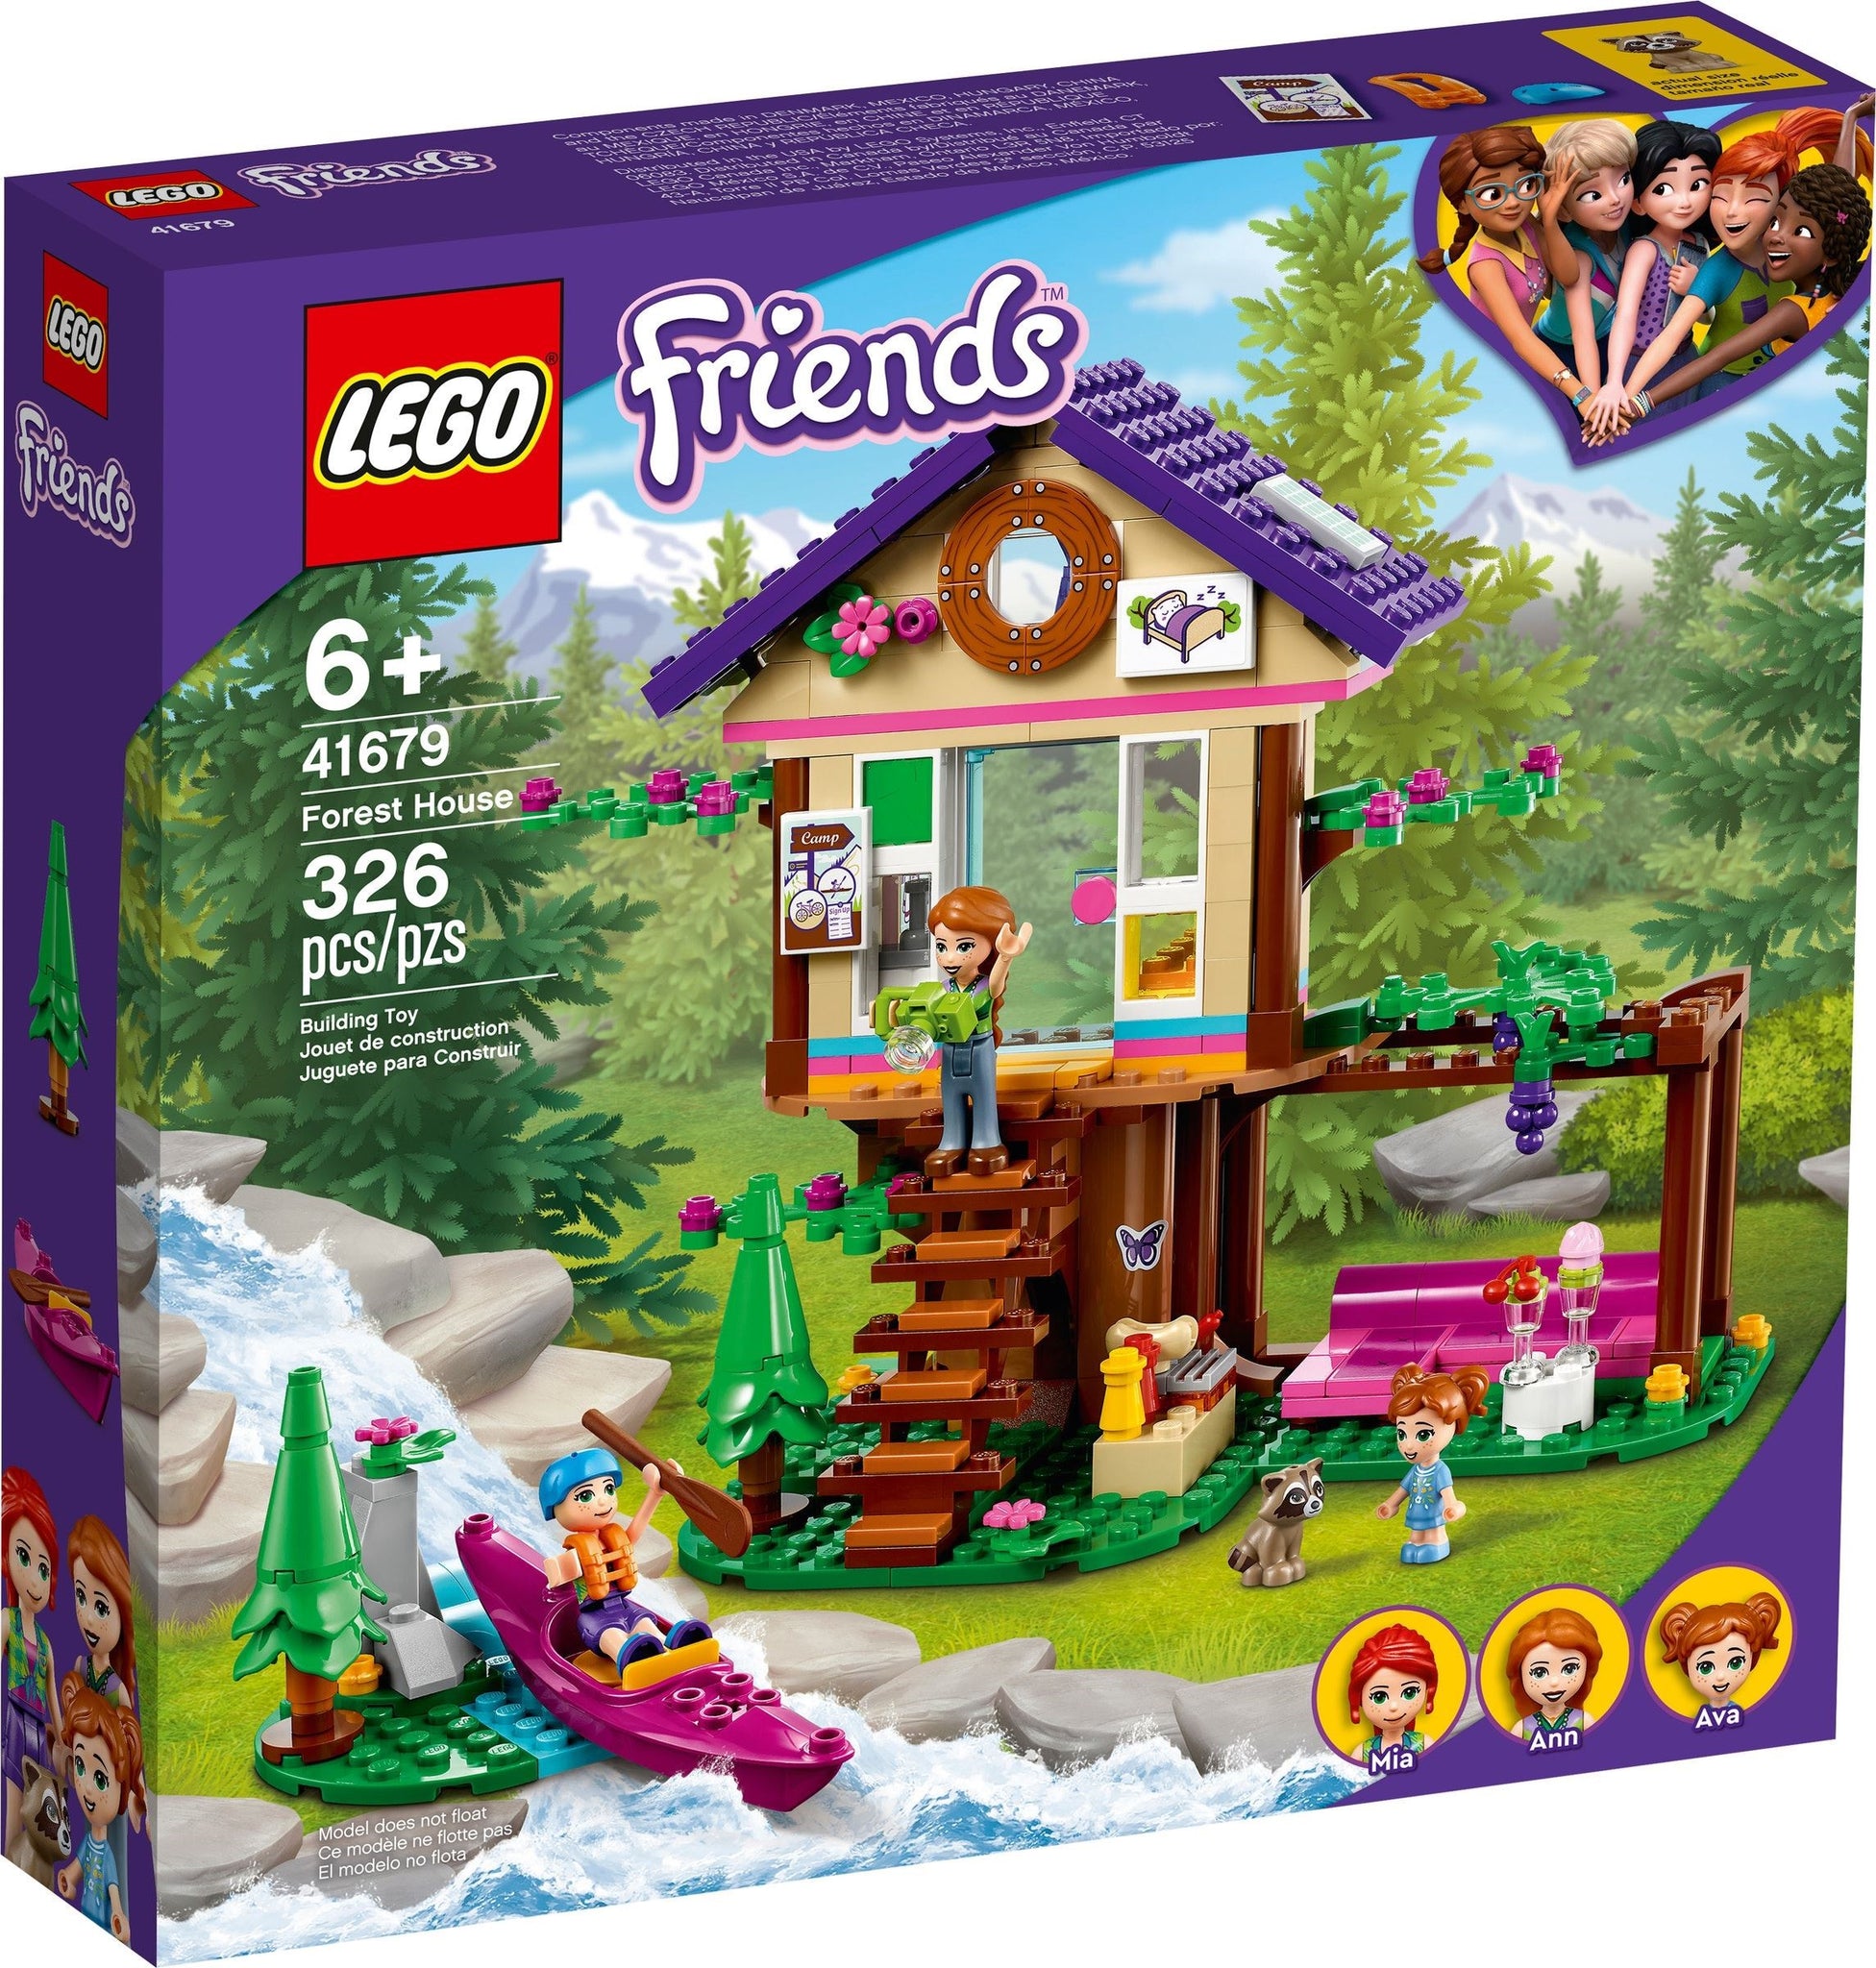 LEGO® Friends 41679 Forest House pieces) – AESOP'S FABLE